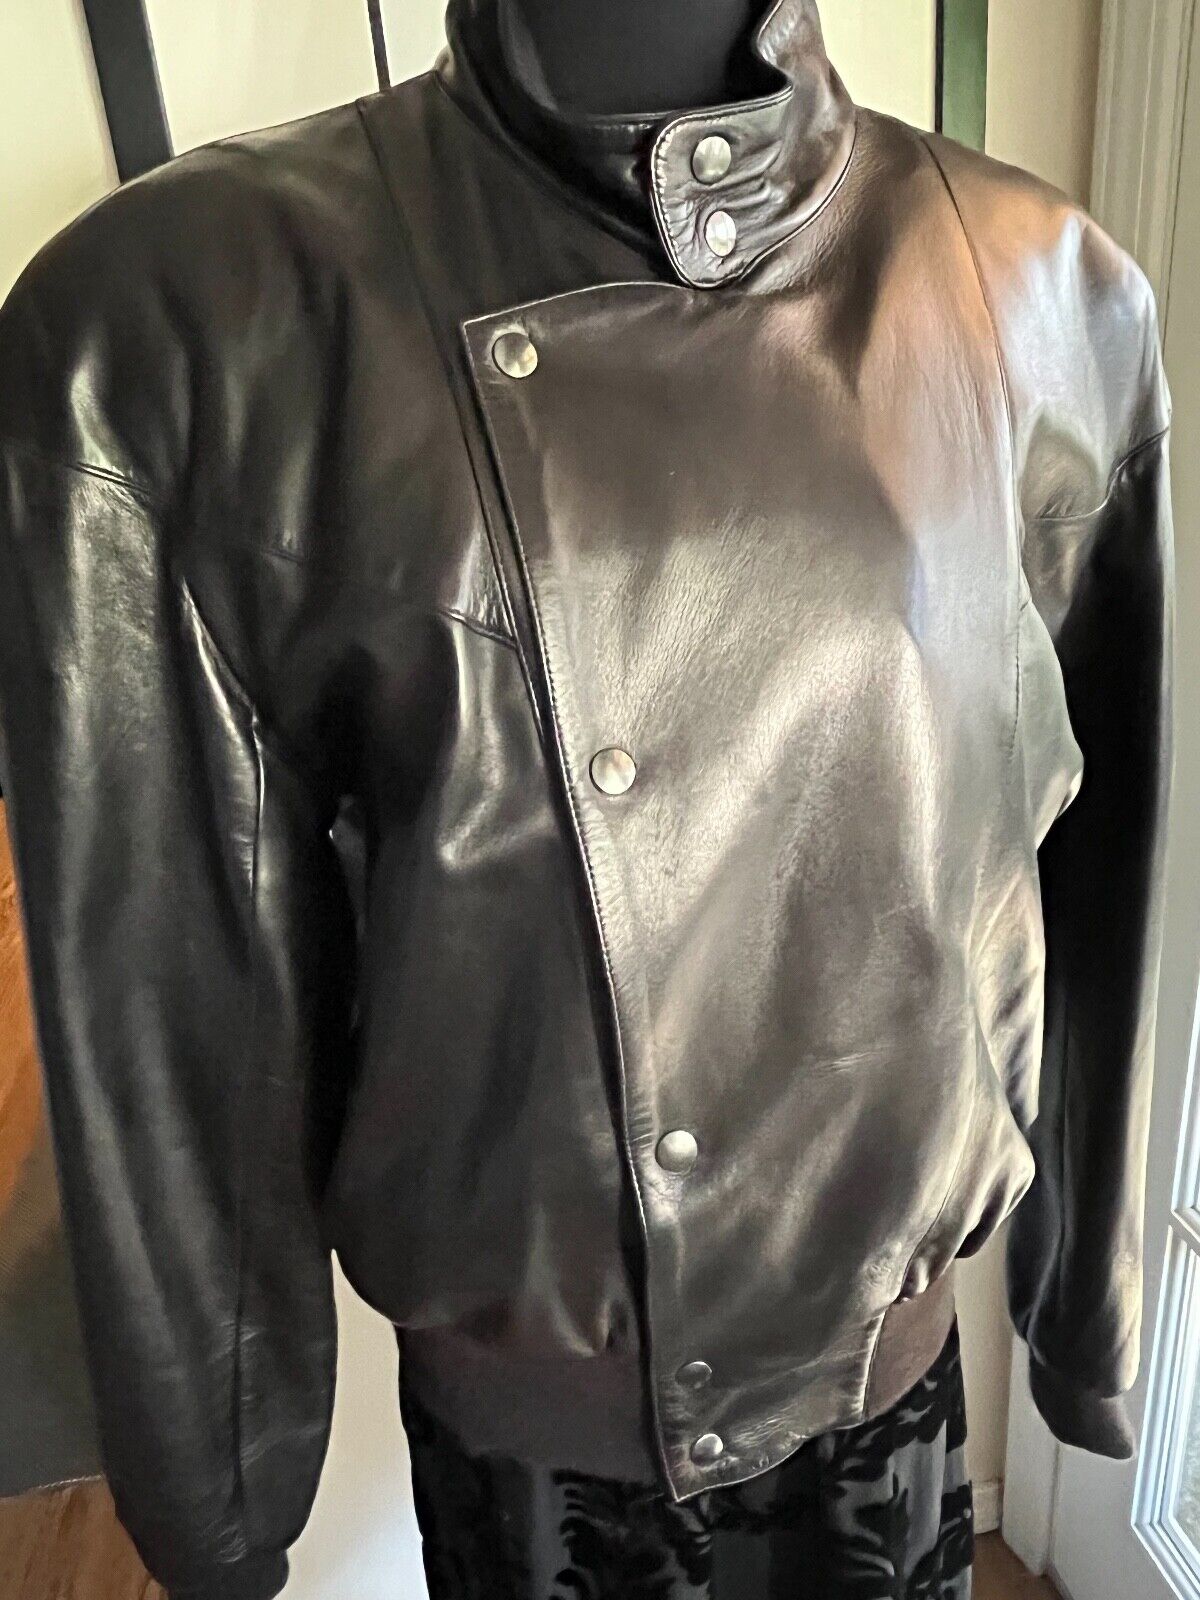 90's Vintage Leather jacket by Montana - ライダースジャケット